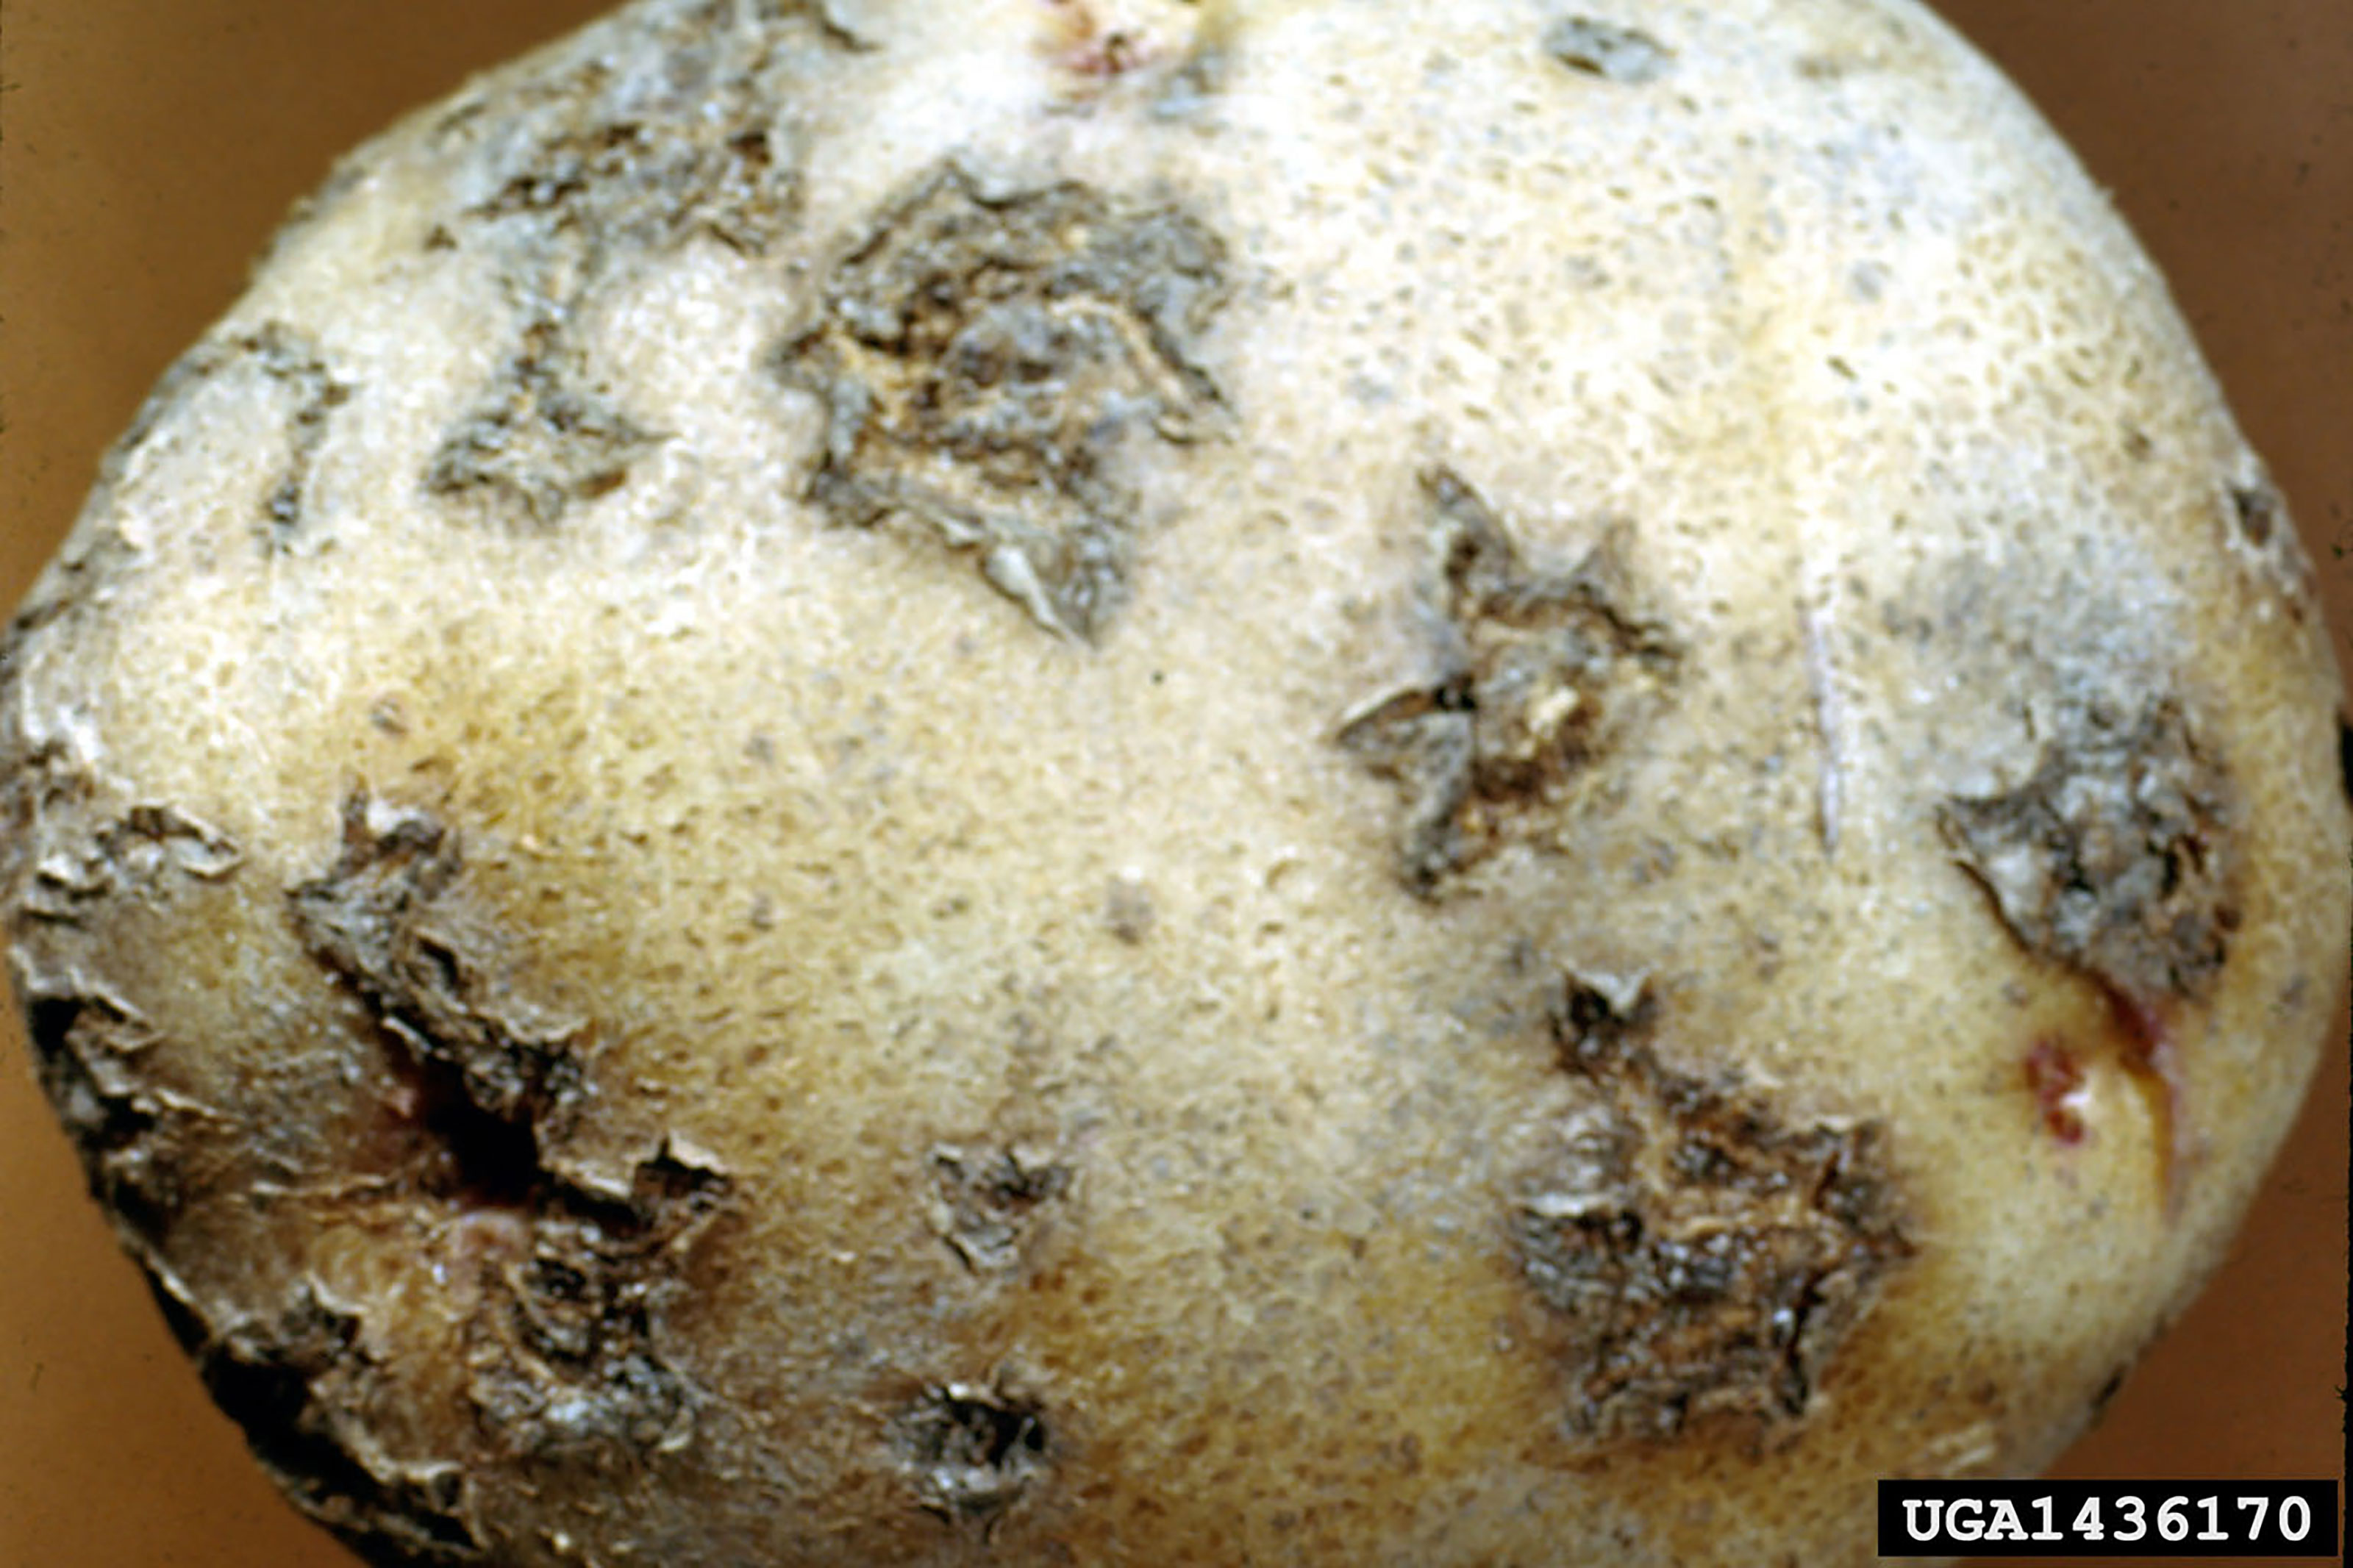 A white potato with crusty, brown scabs and lesions throughout its skin.